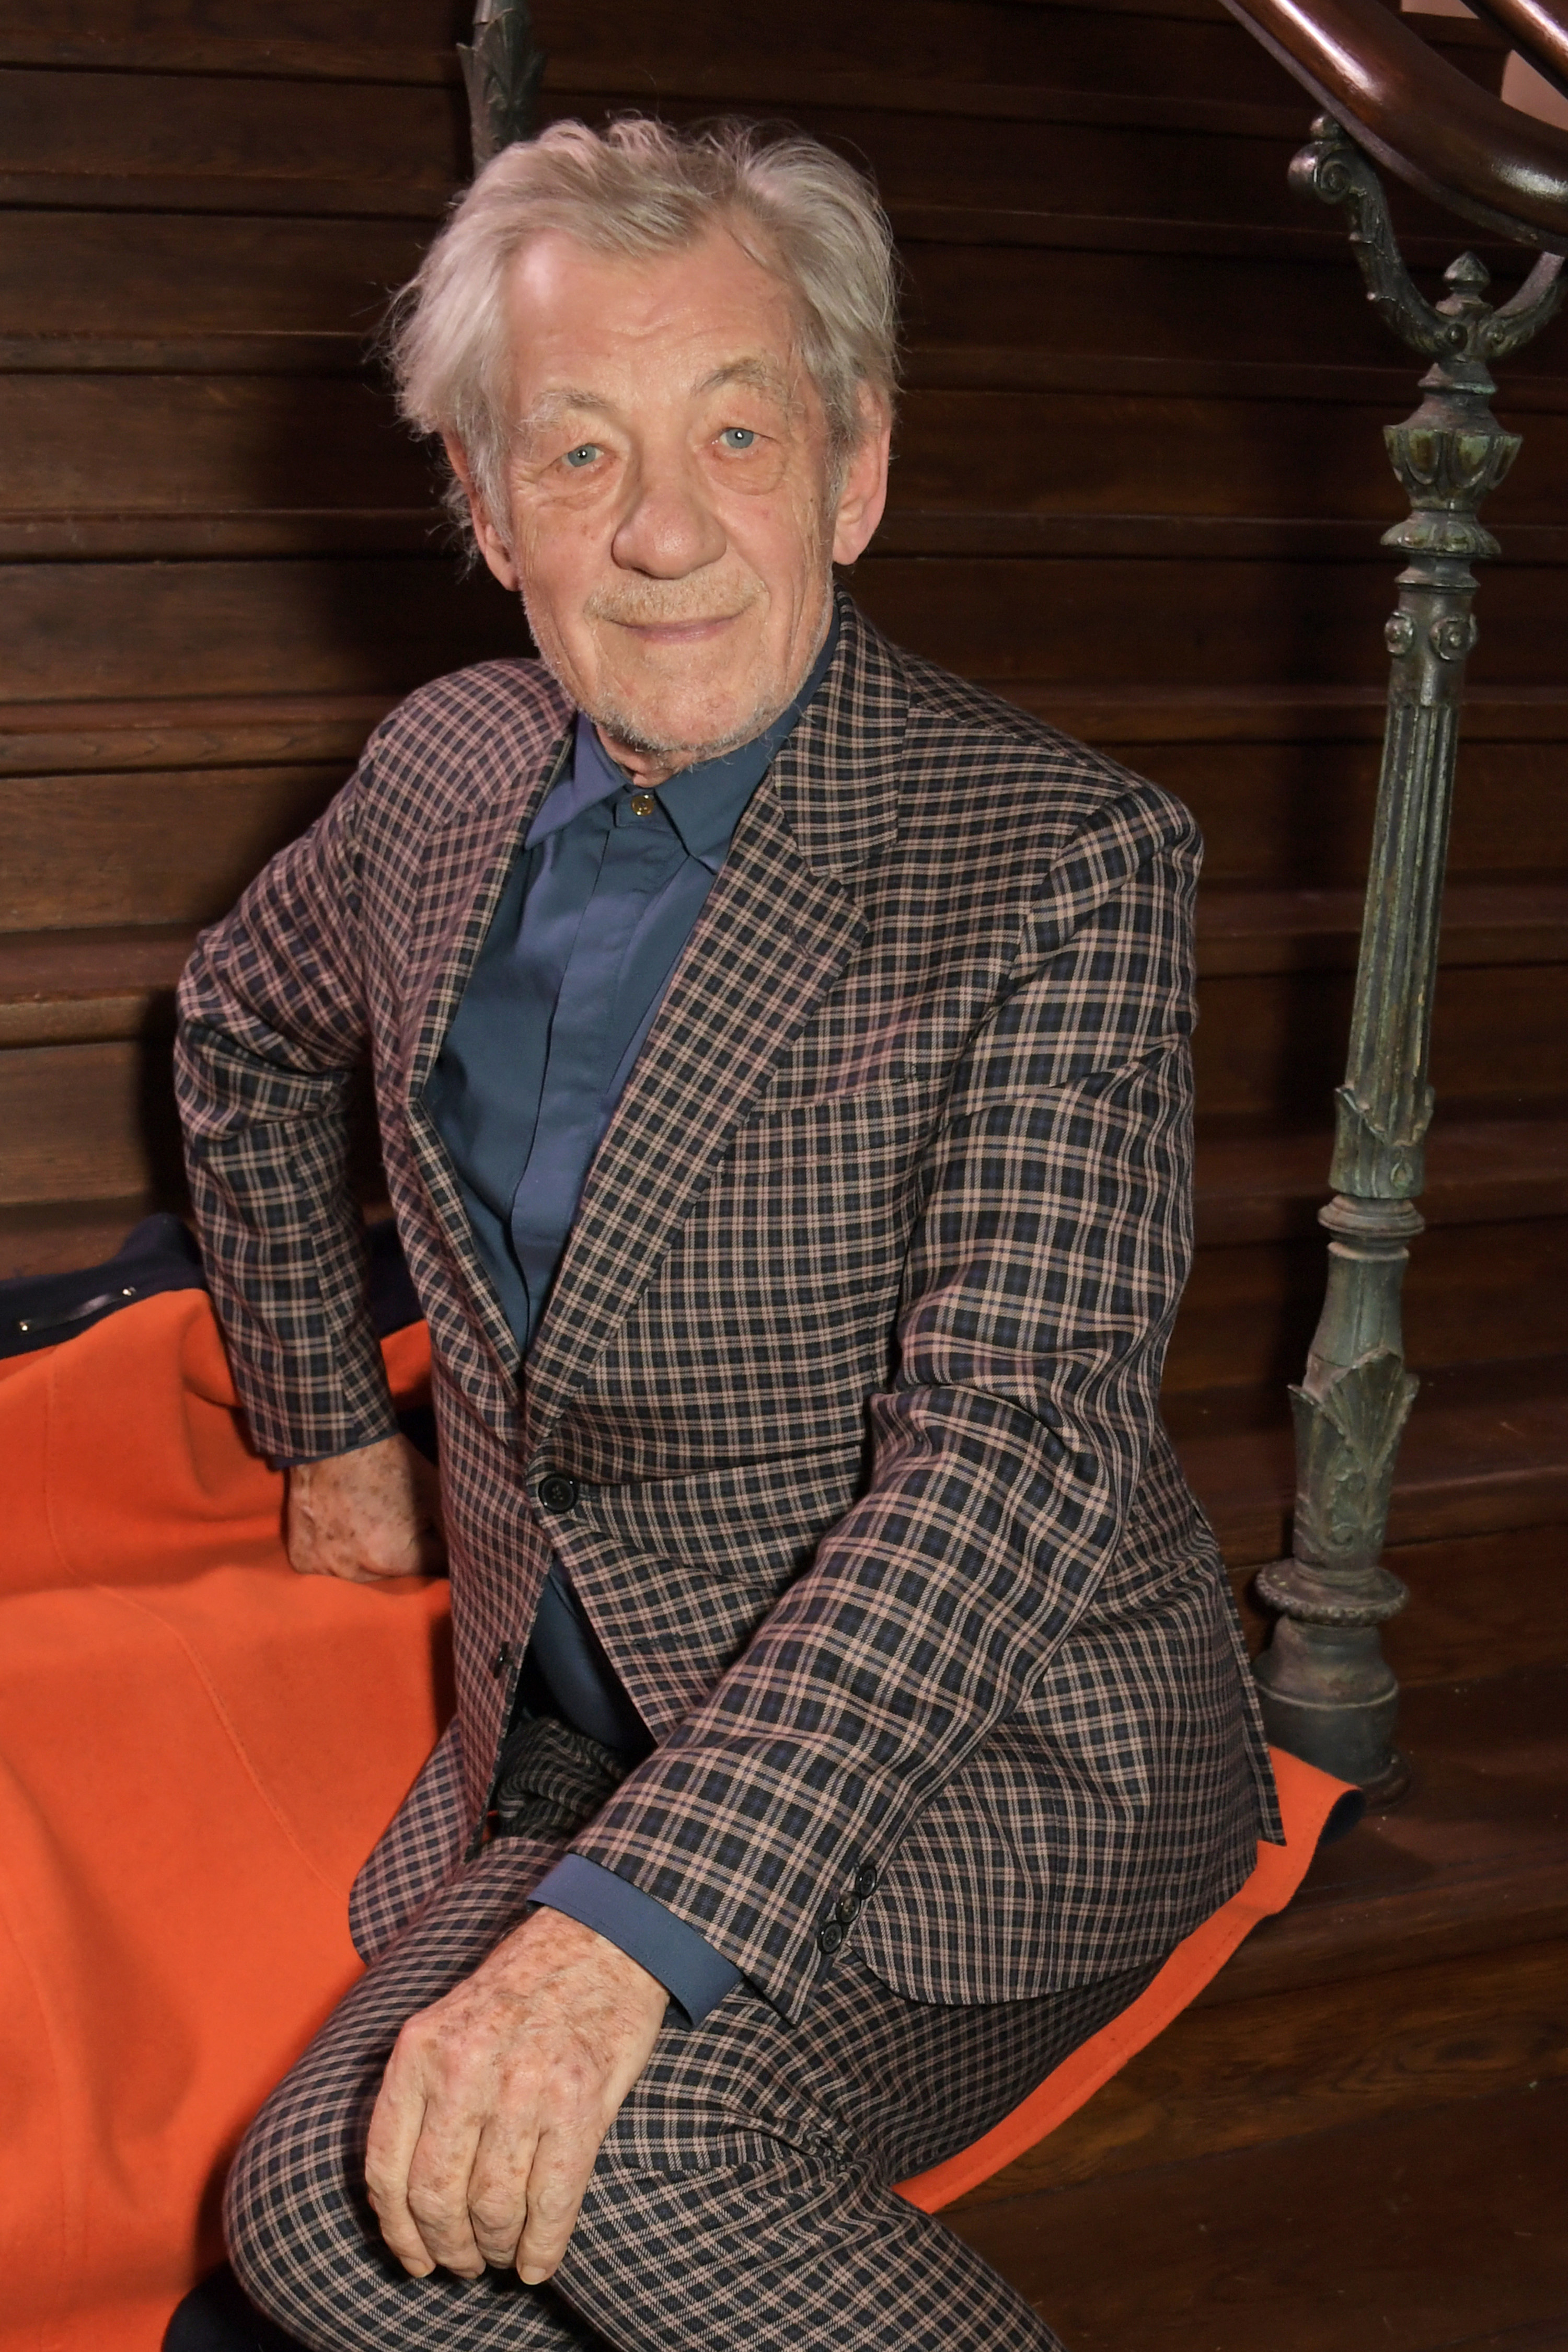 Sir Ian McKellen sitting and posing for a photo